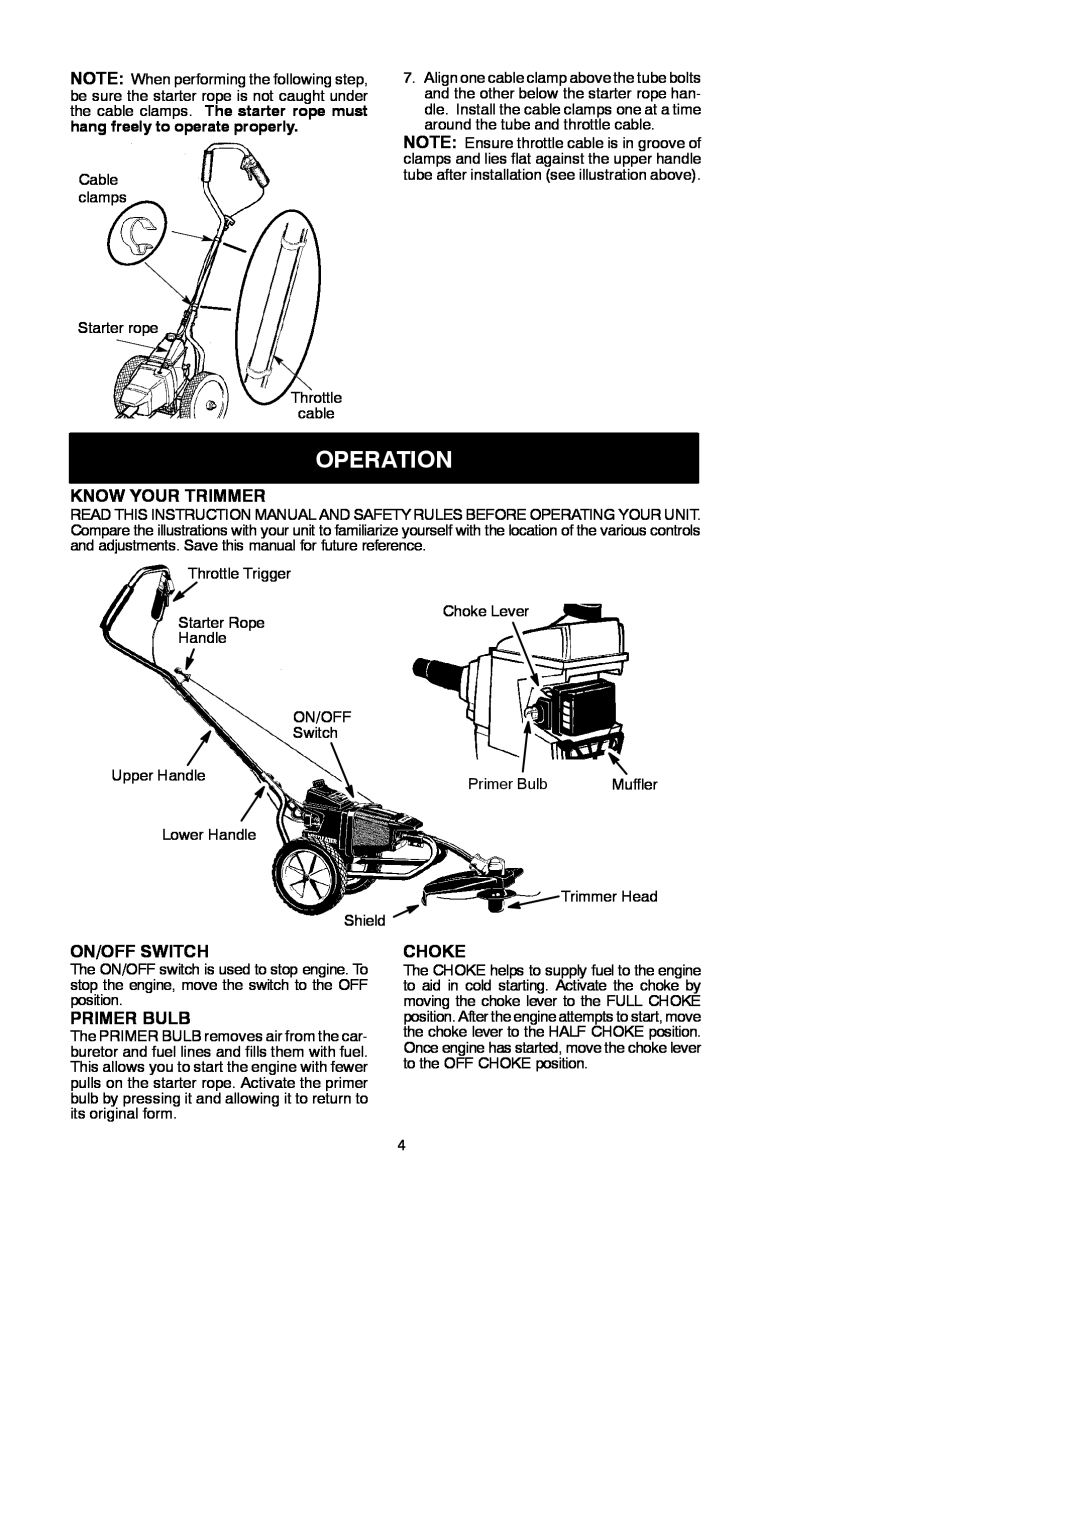 Poulan WT3100 instruction manual Operation, Know Your Trimmer, On/Off Switch, Primer Bulb, Choke 